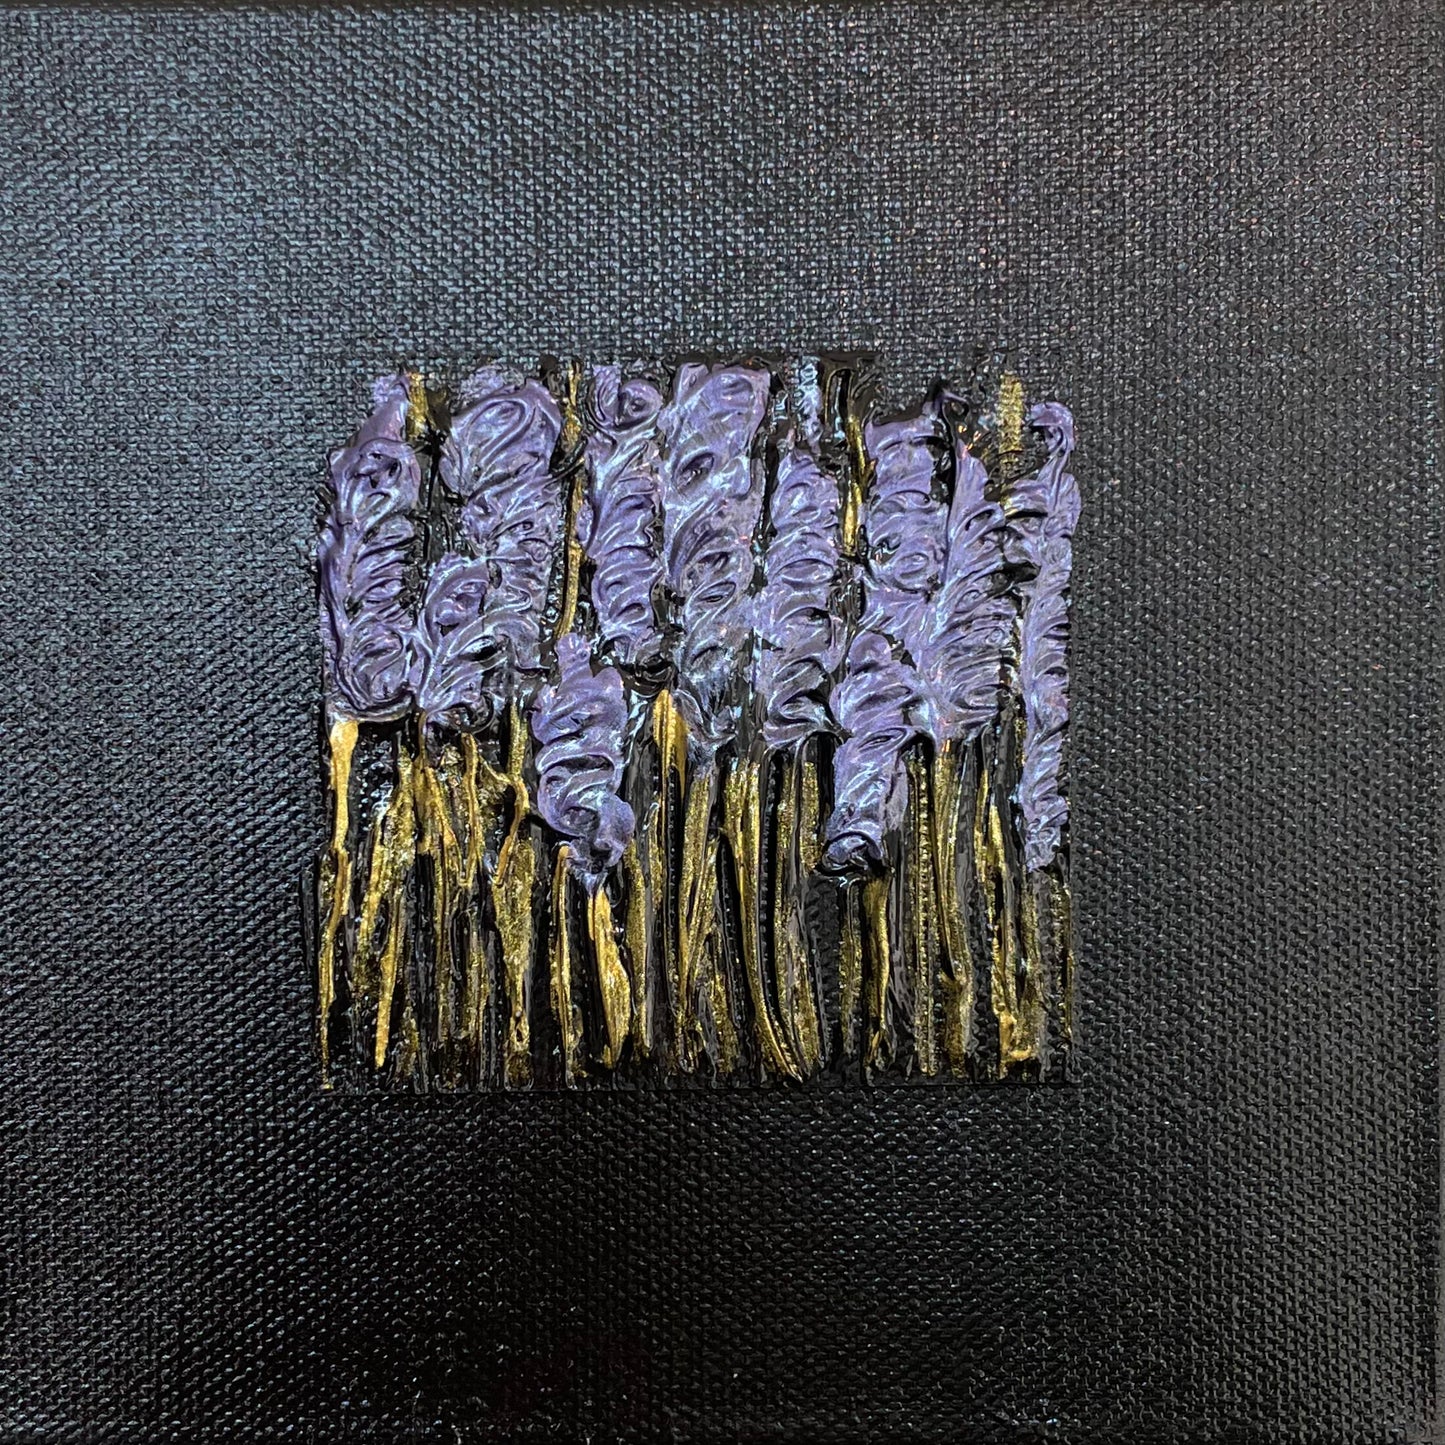 Lavender No. 1 by Laura Taylor Shields